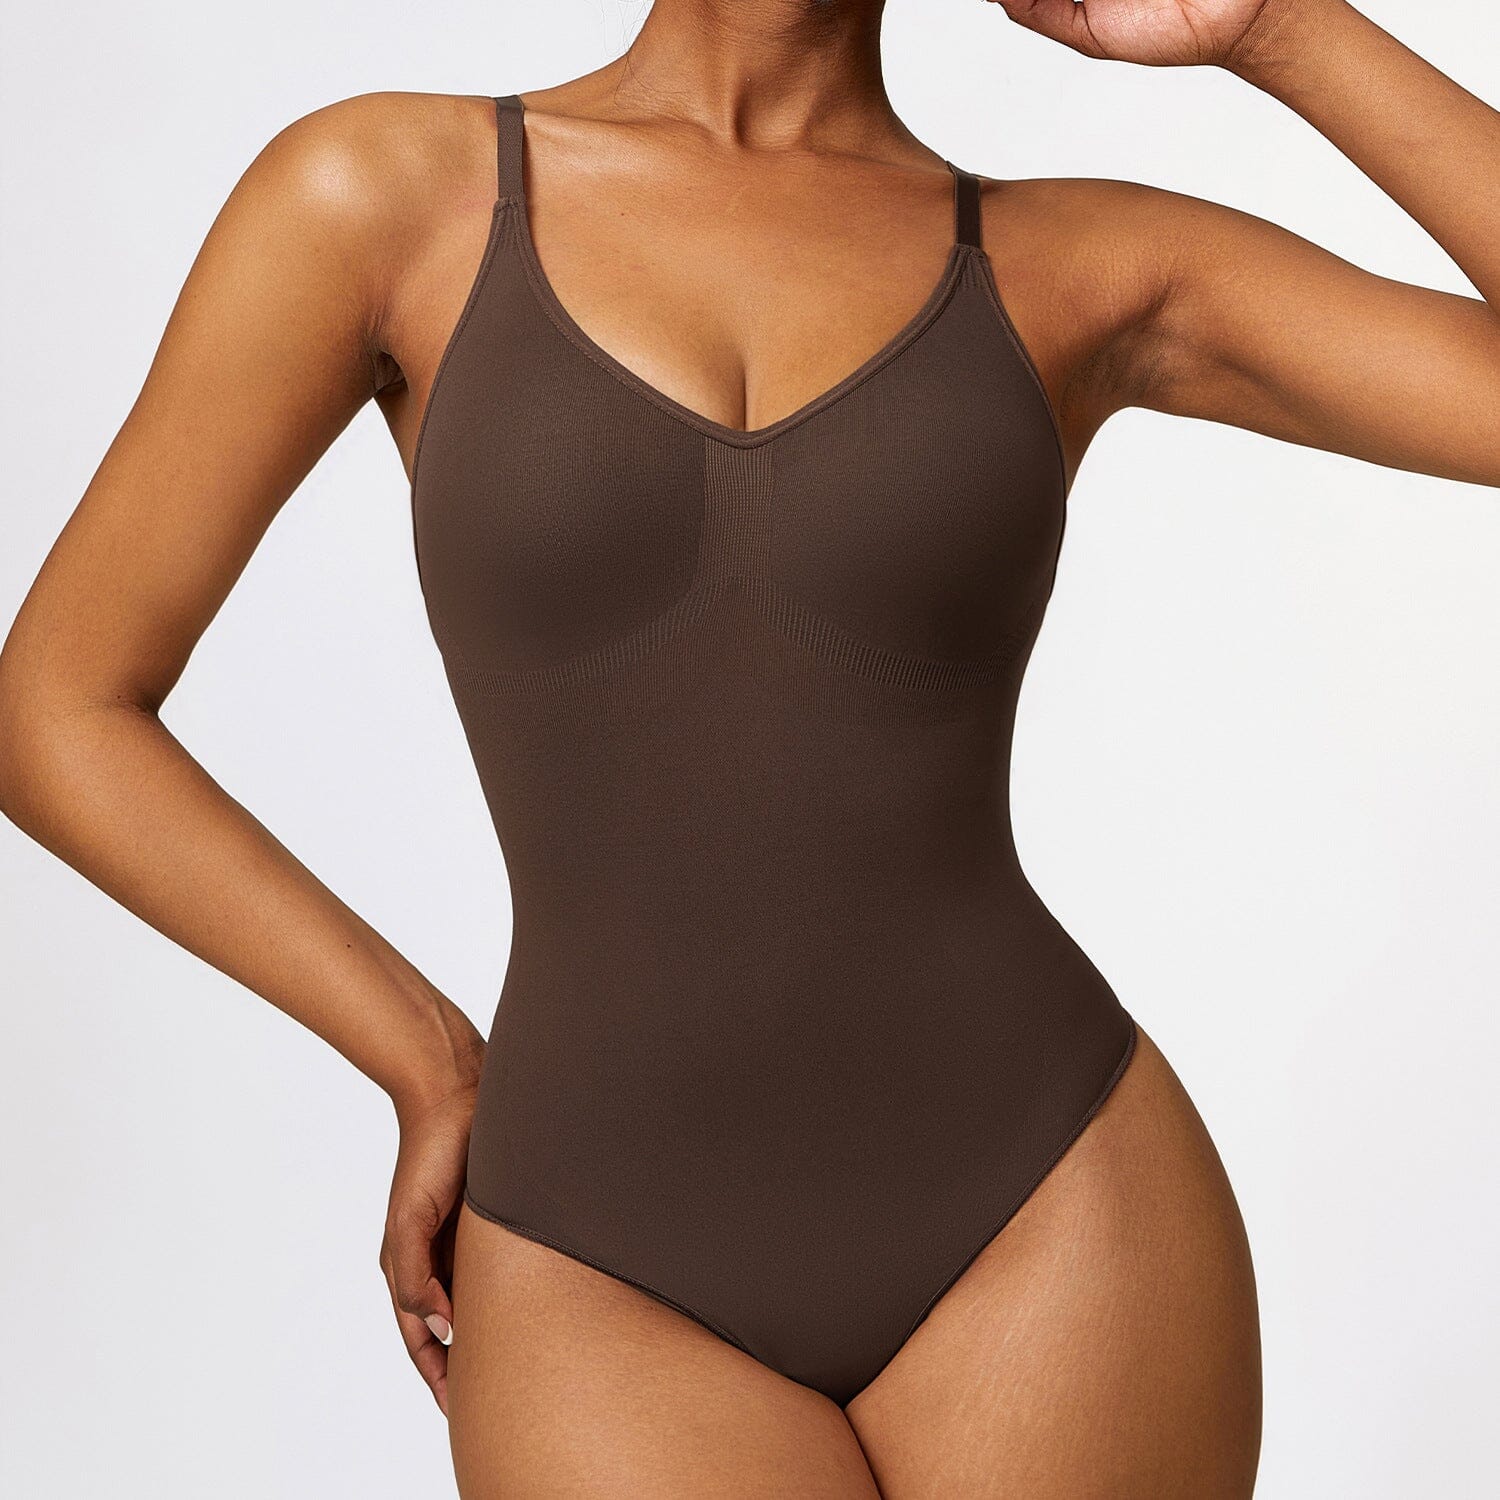 Enigmatic Seamless Bodysuit Jumpsuit Starlethics Deep Brown S 